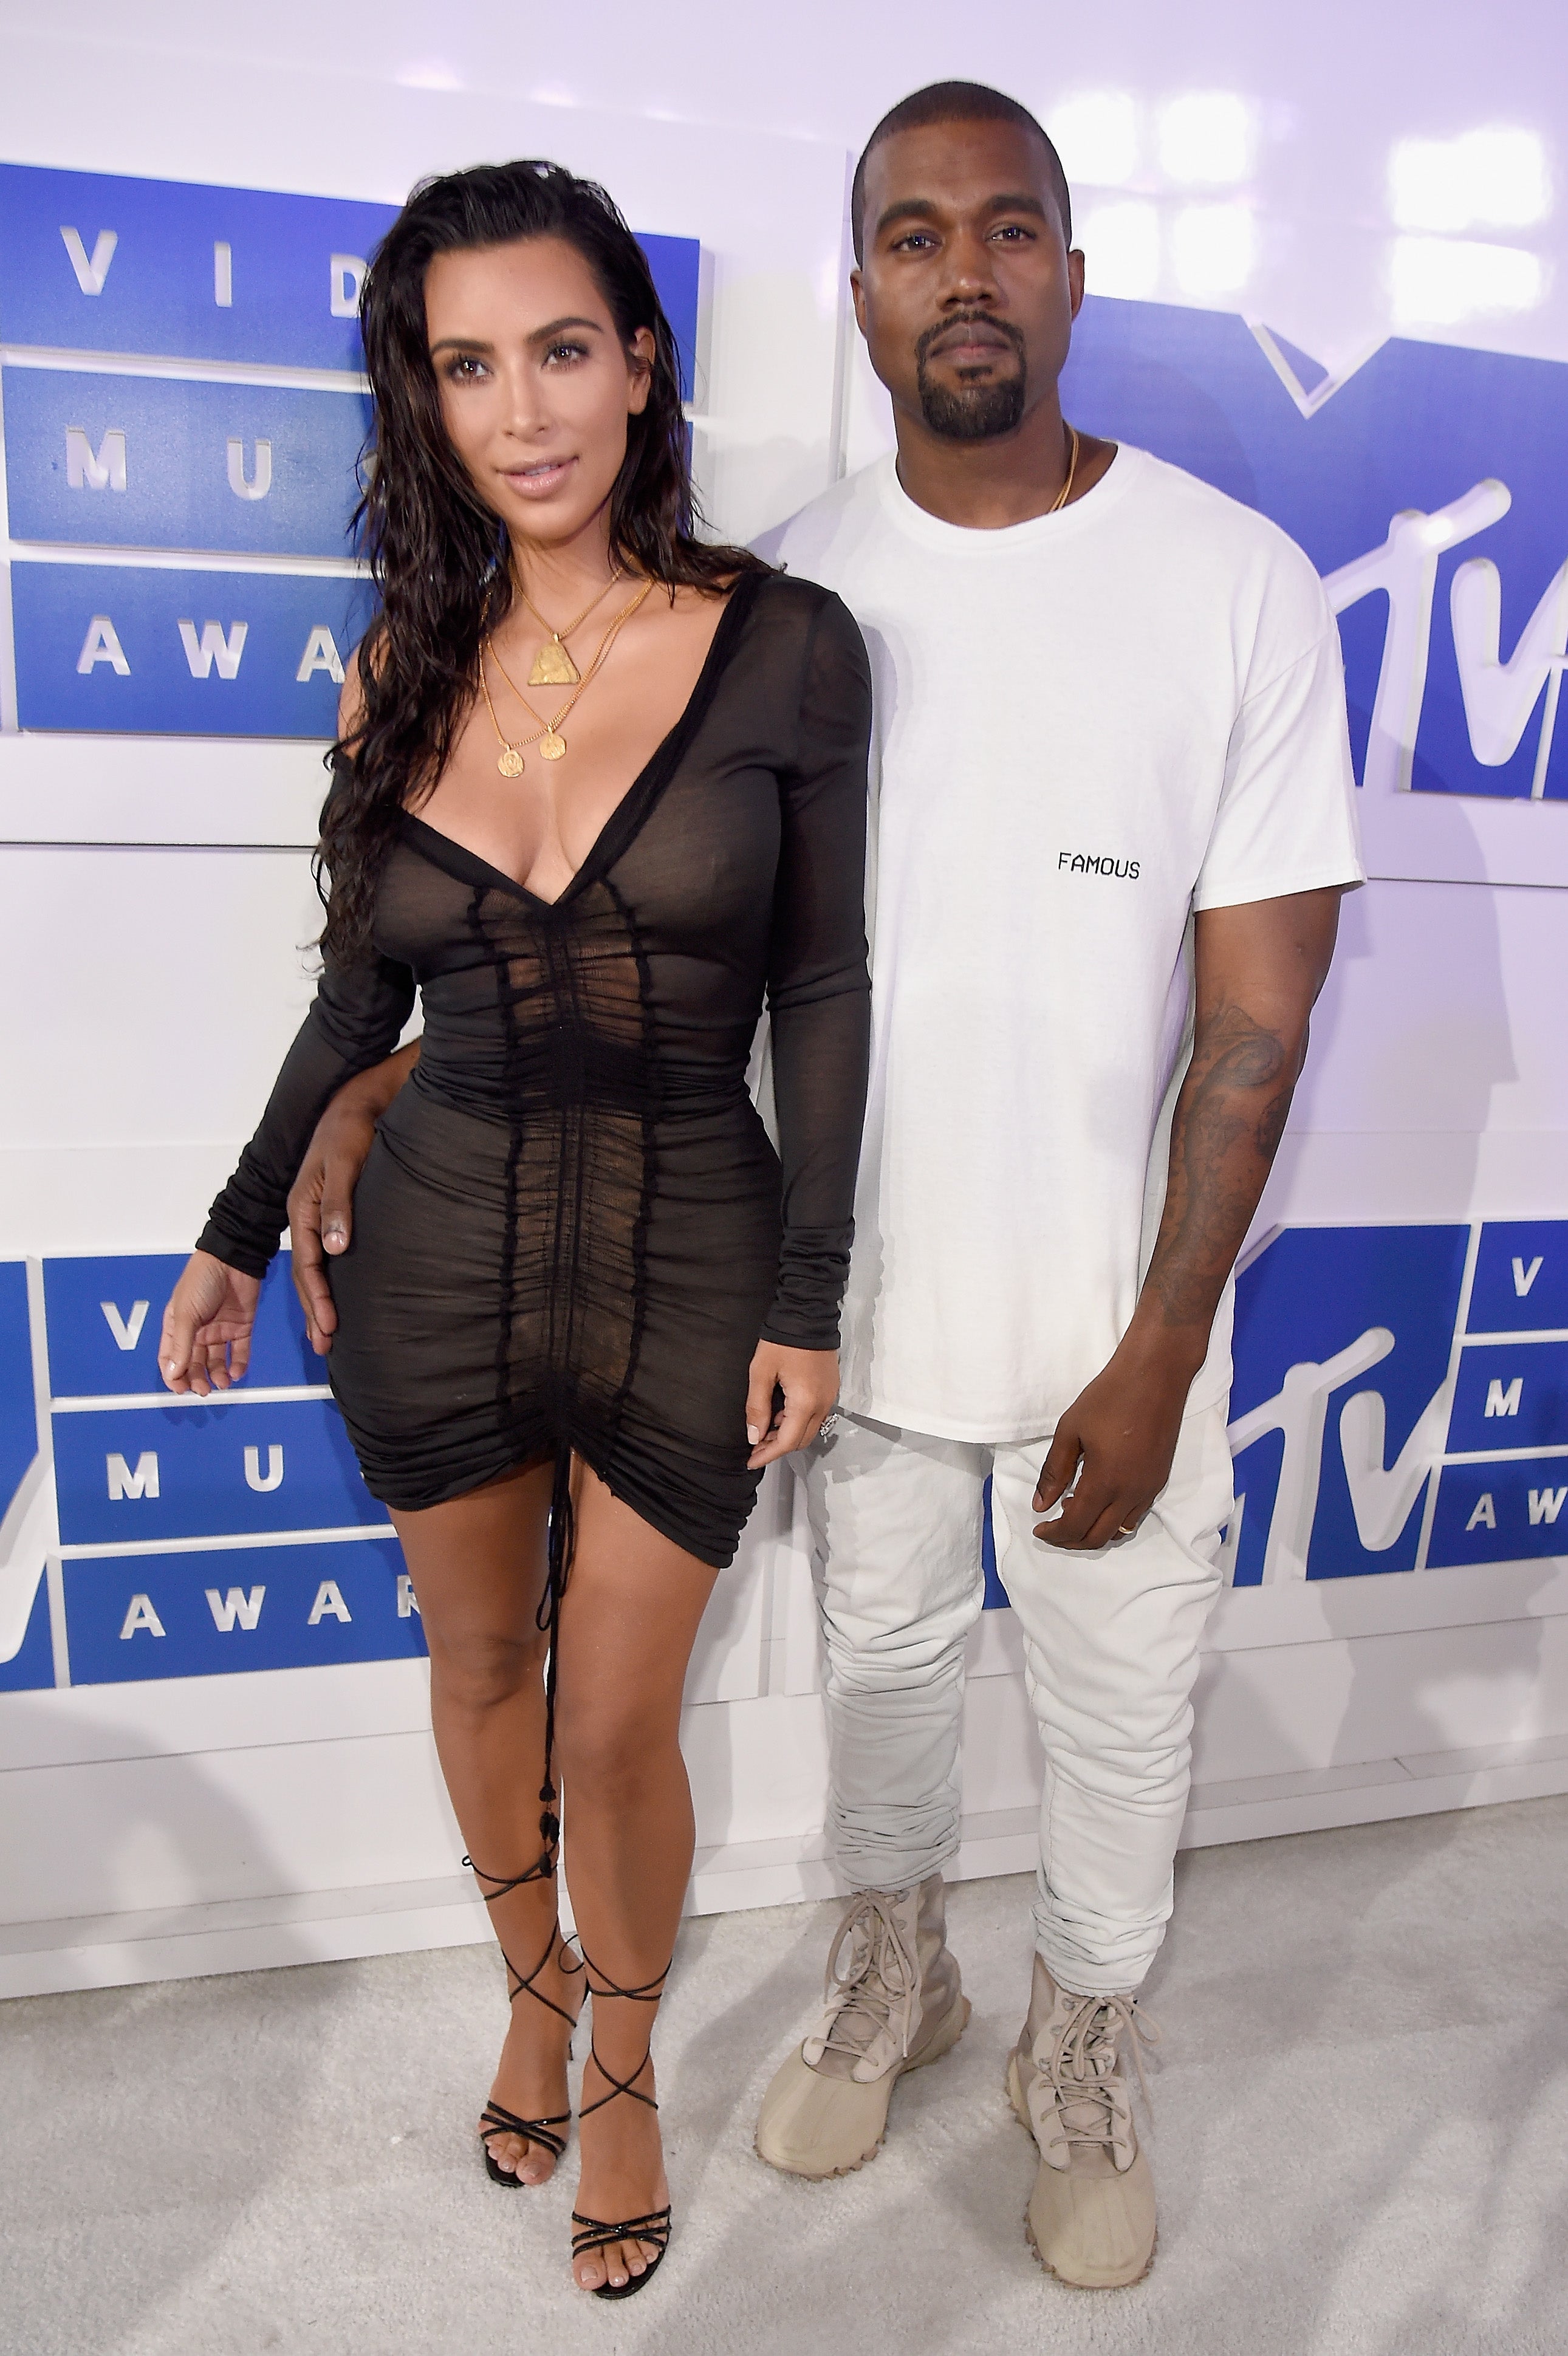 Kanye West And Kim Kardashian West Wow On The VMAs Red Carpet
